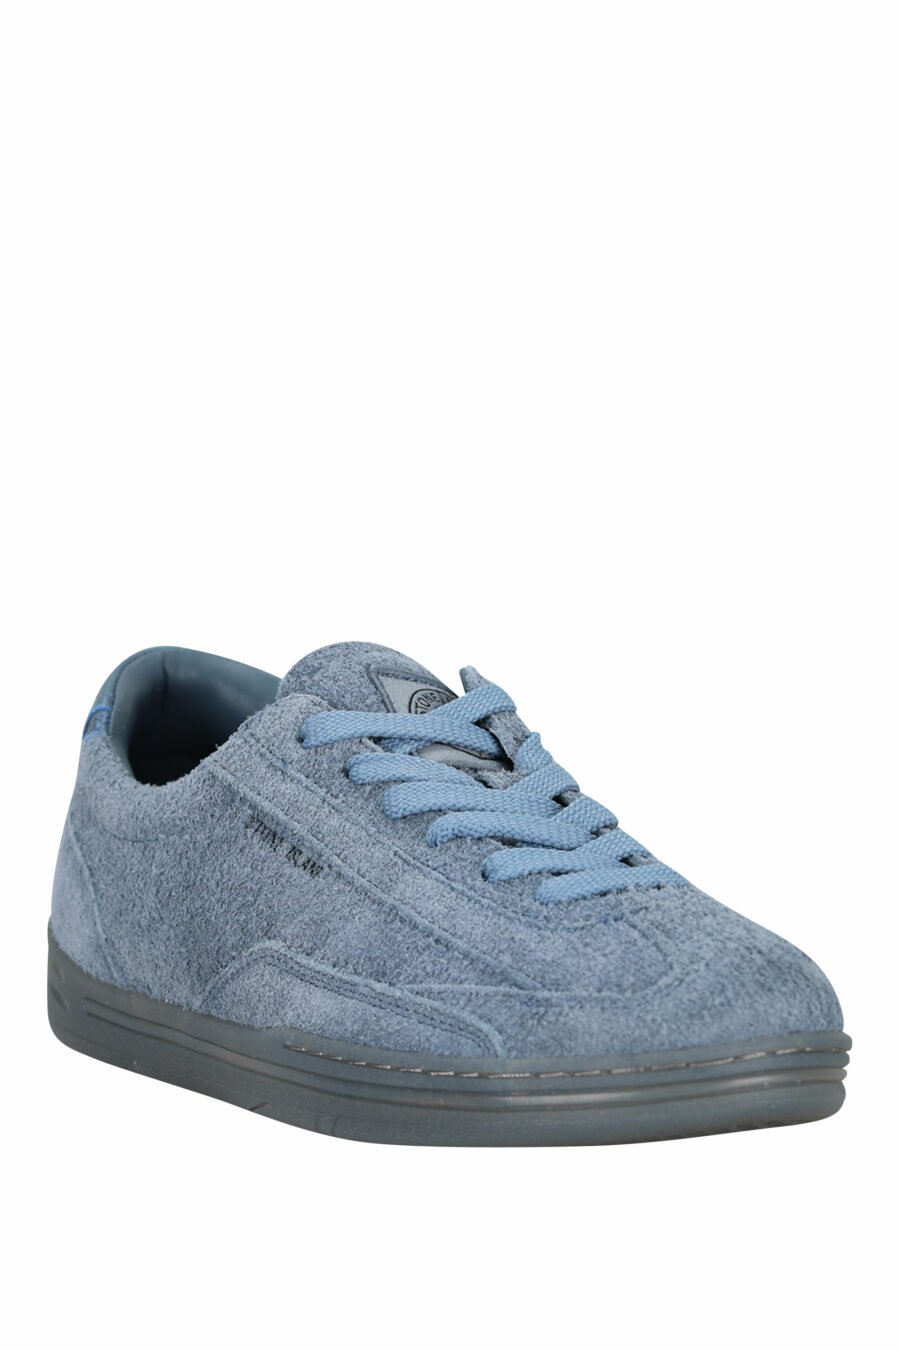 Dark blue trainers with minilogo and grey sole - 8052572937866 1